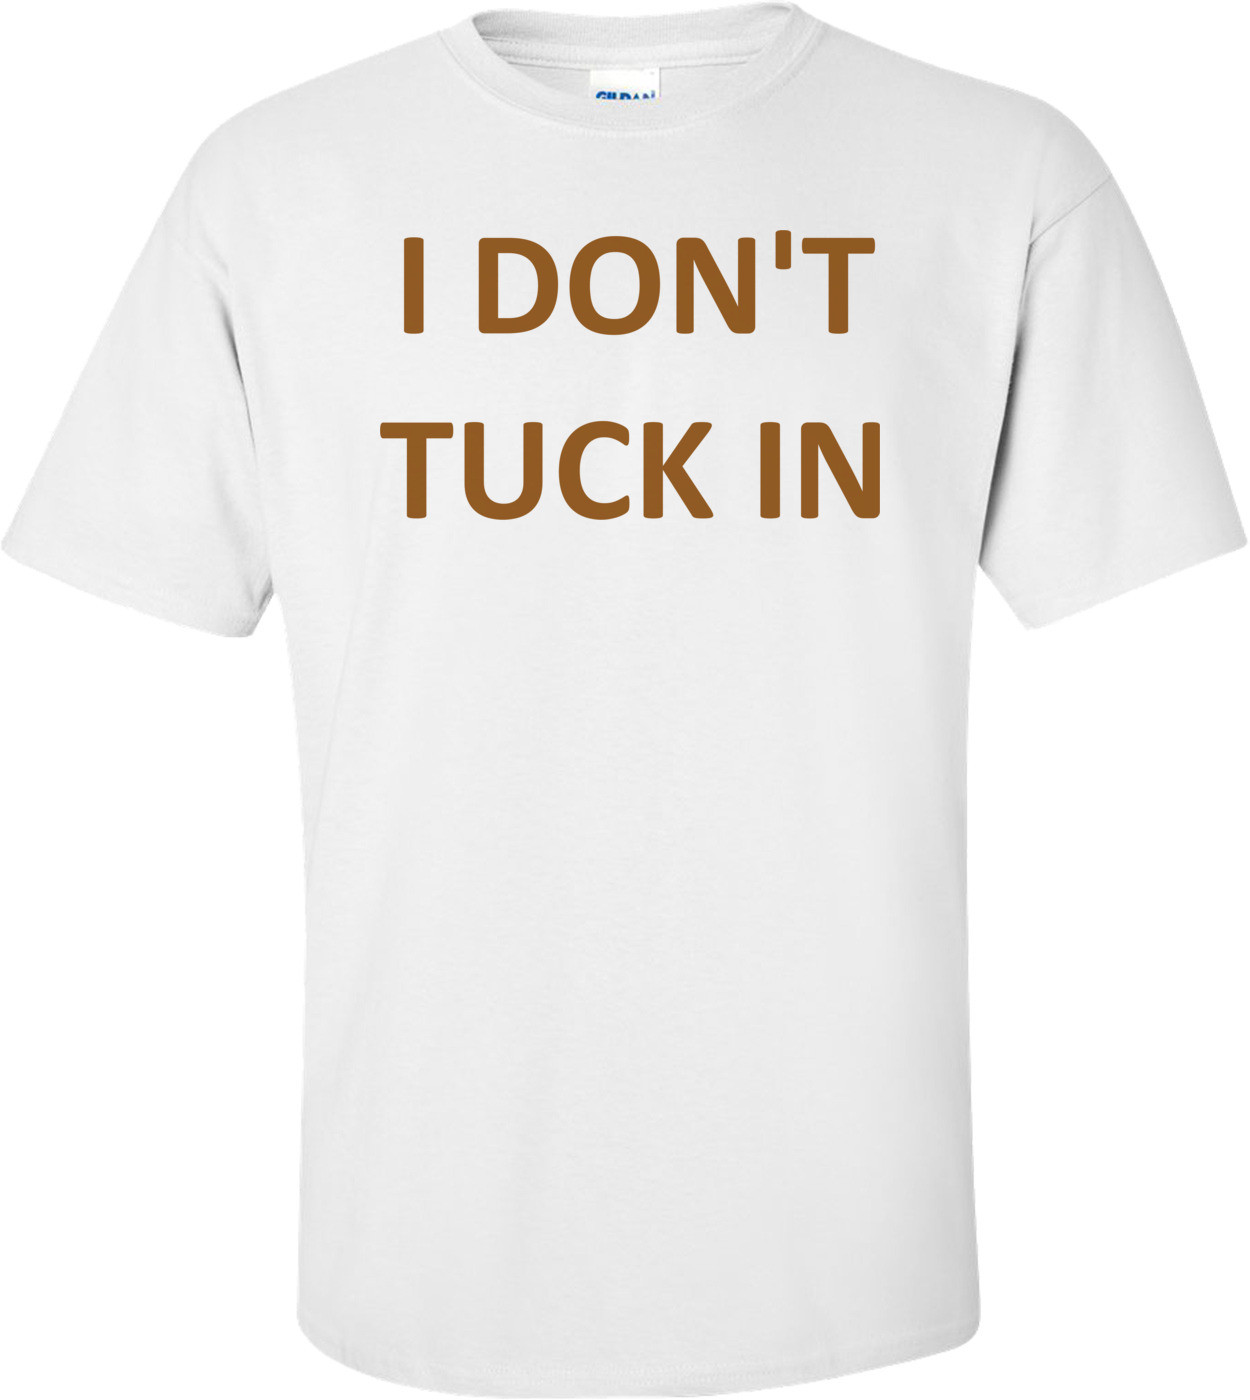 I DON'T TUCK IN Shirt